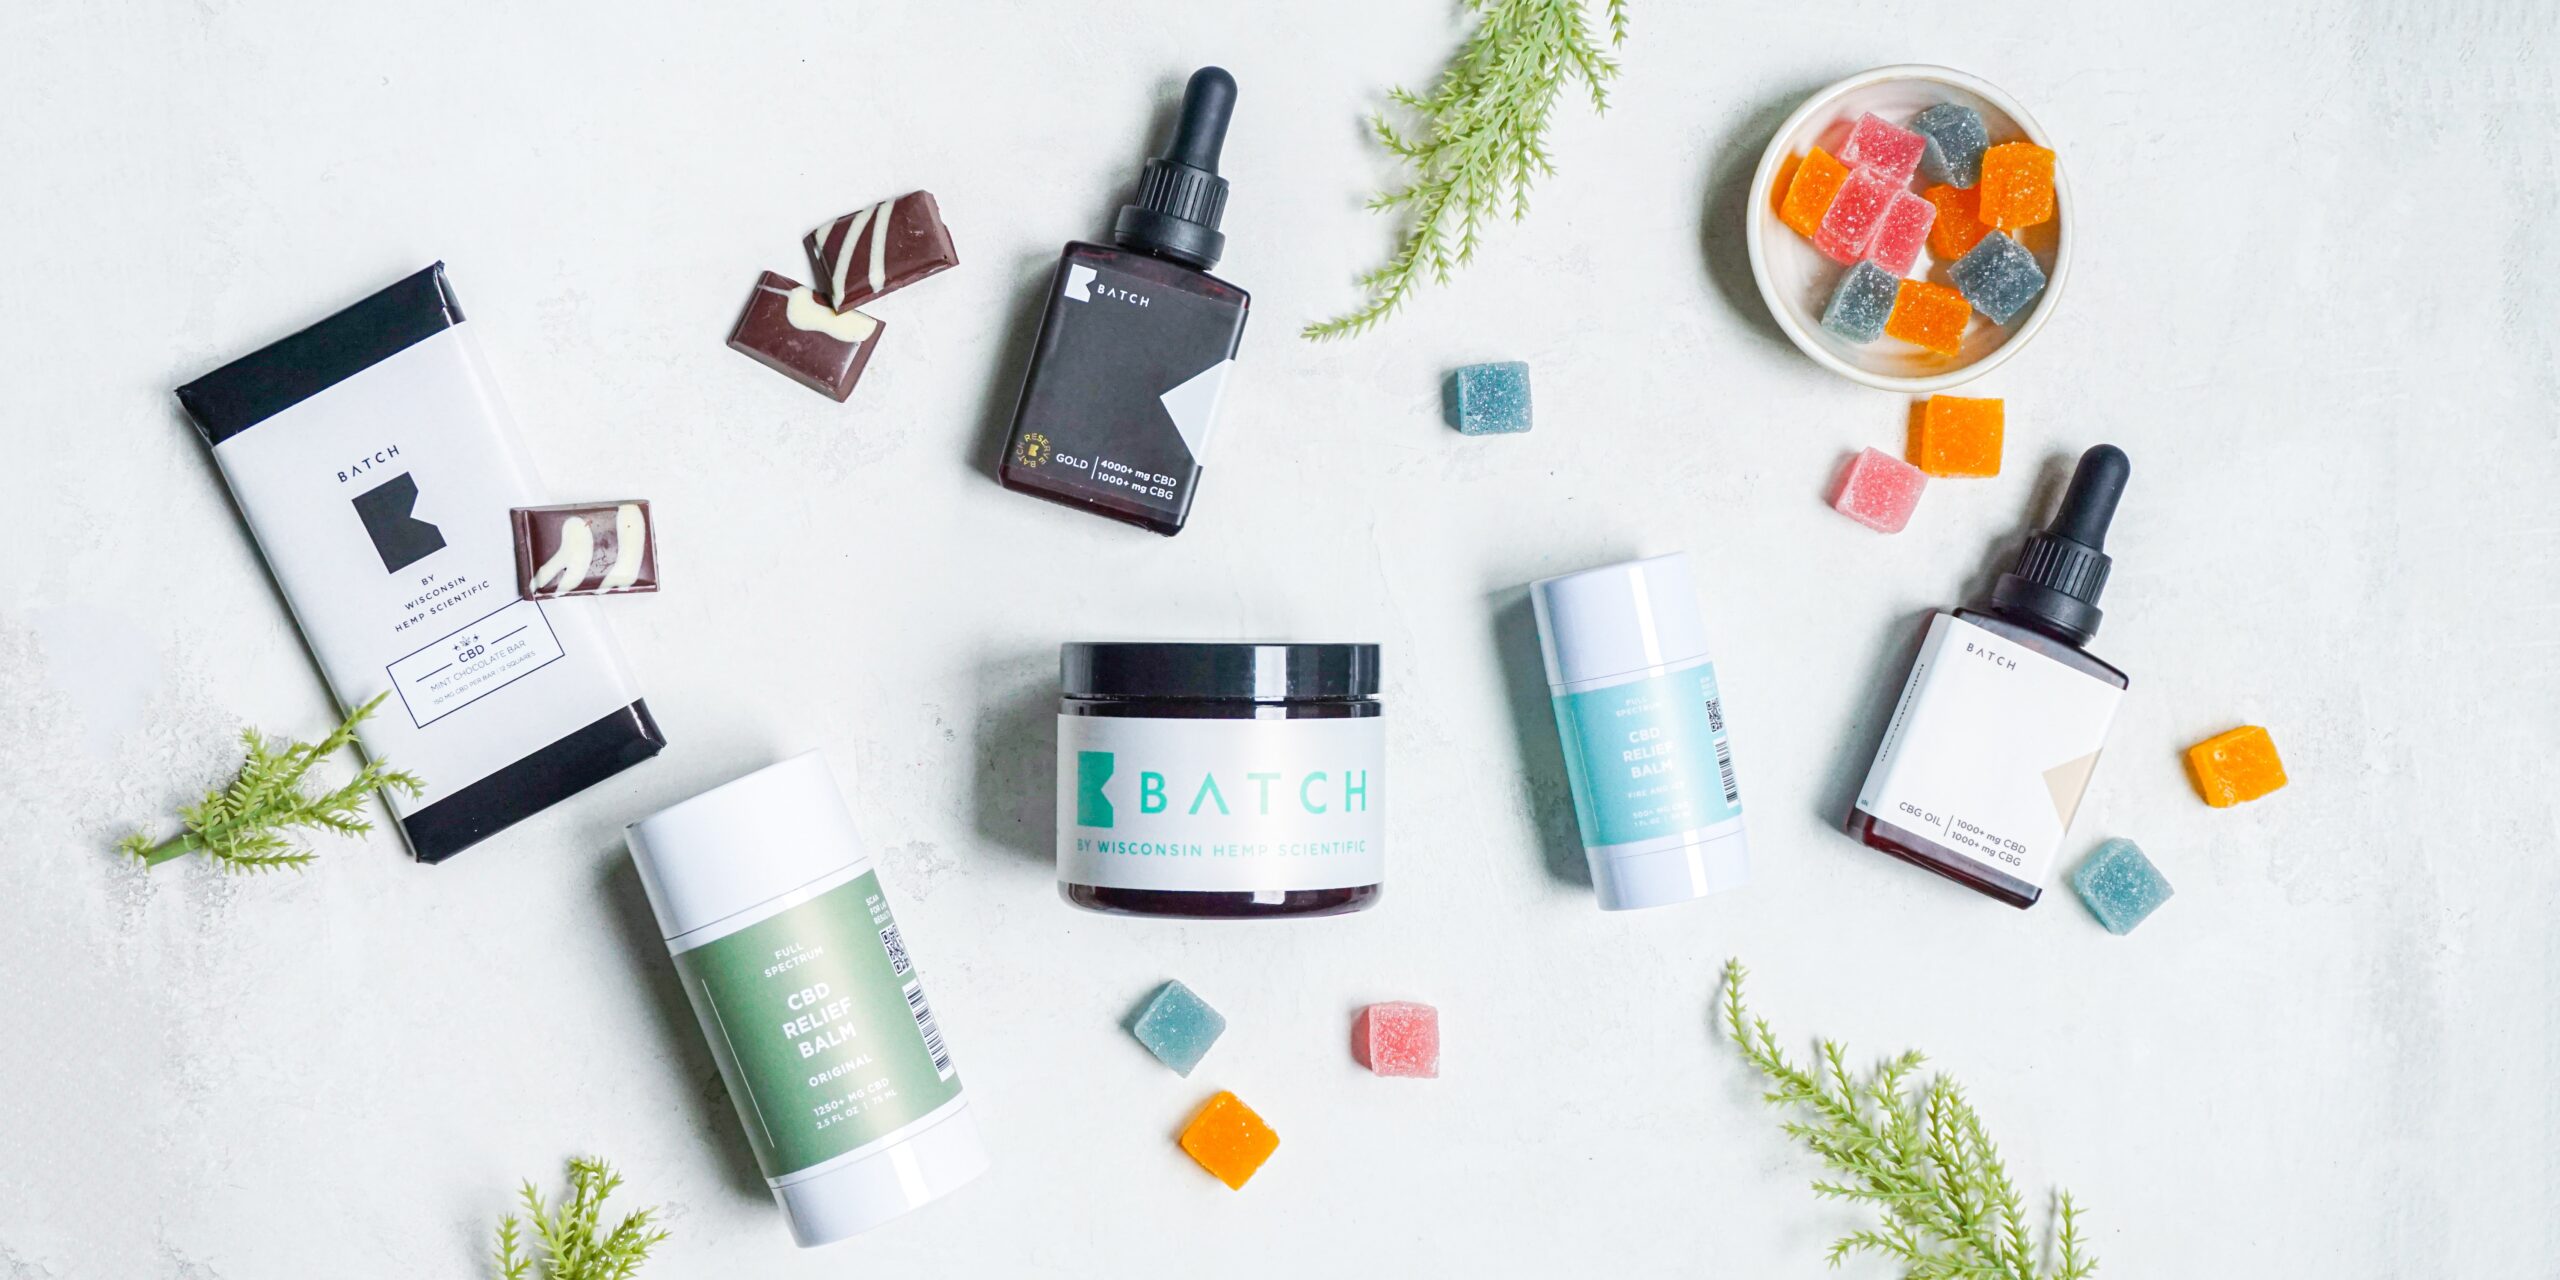  The 5 Natural CBD Brands in 2022